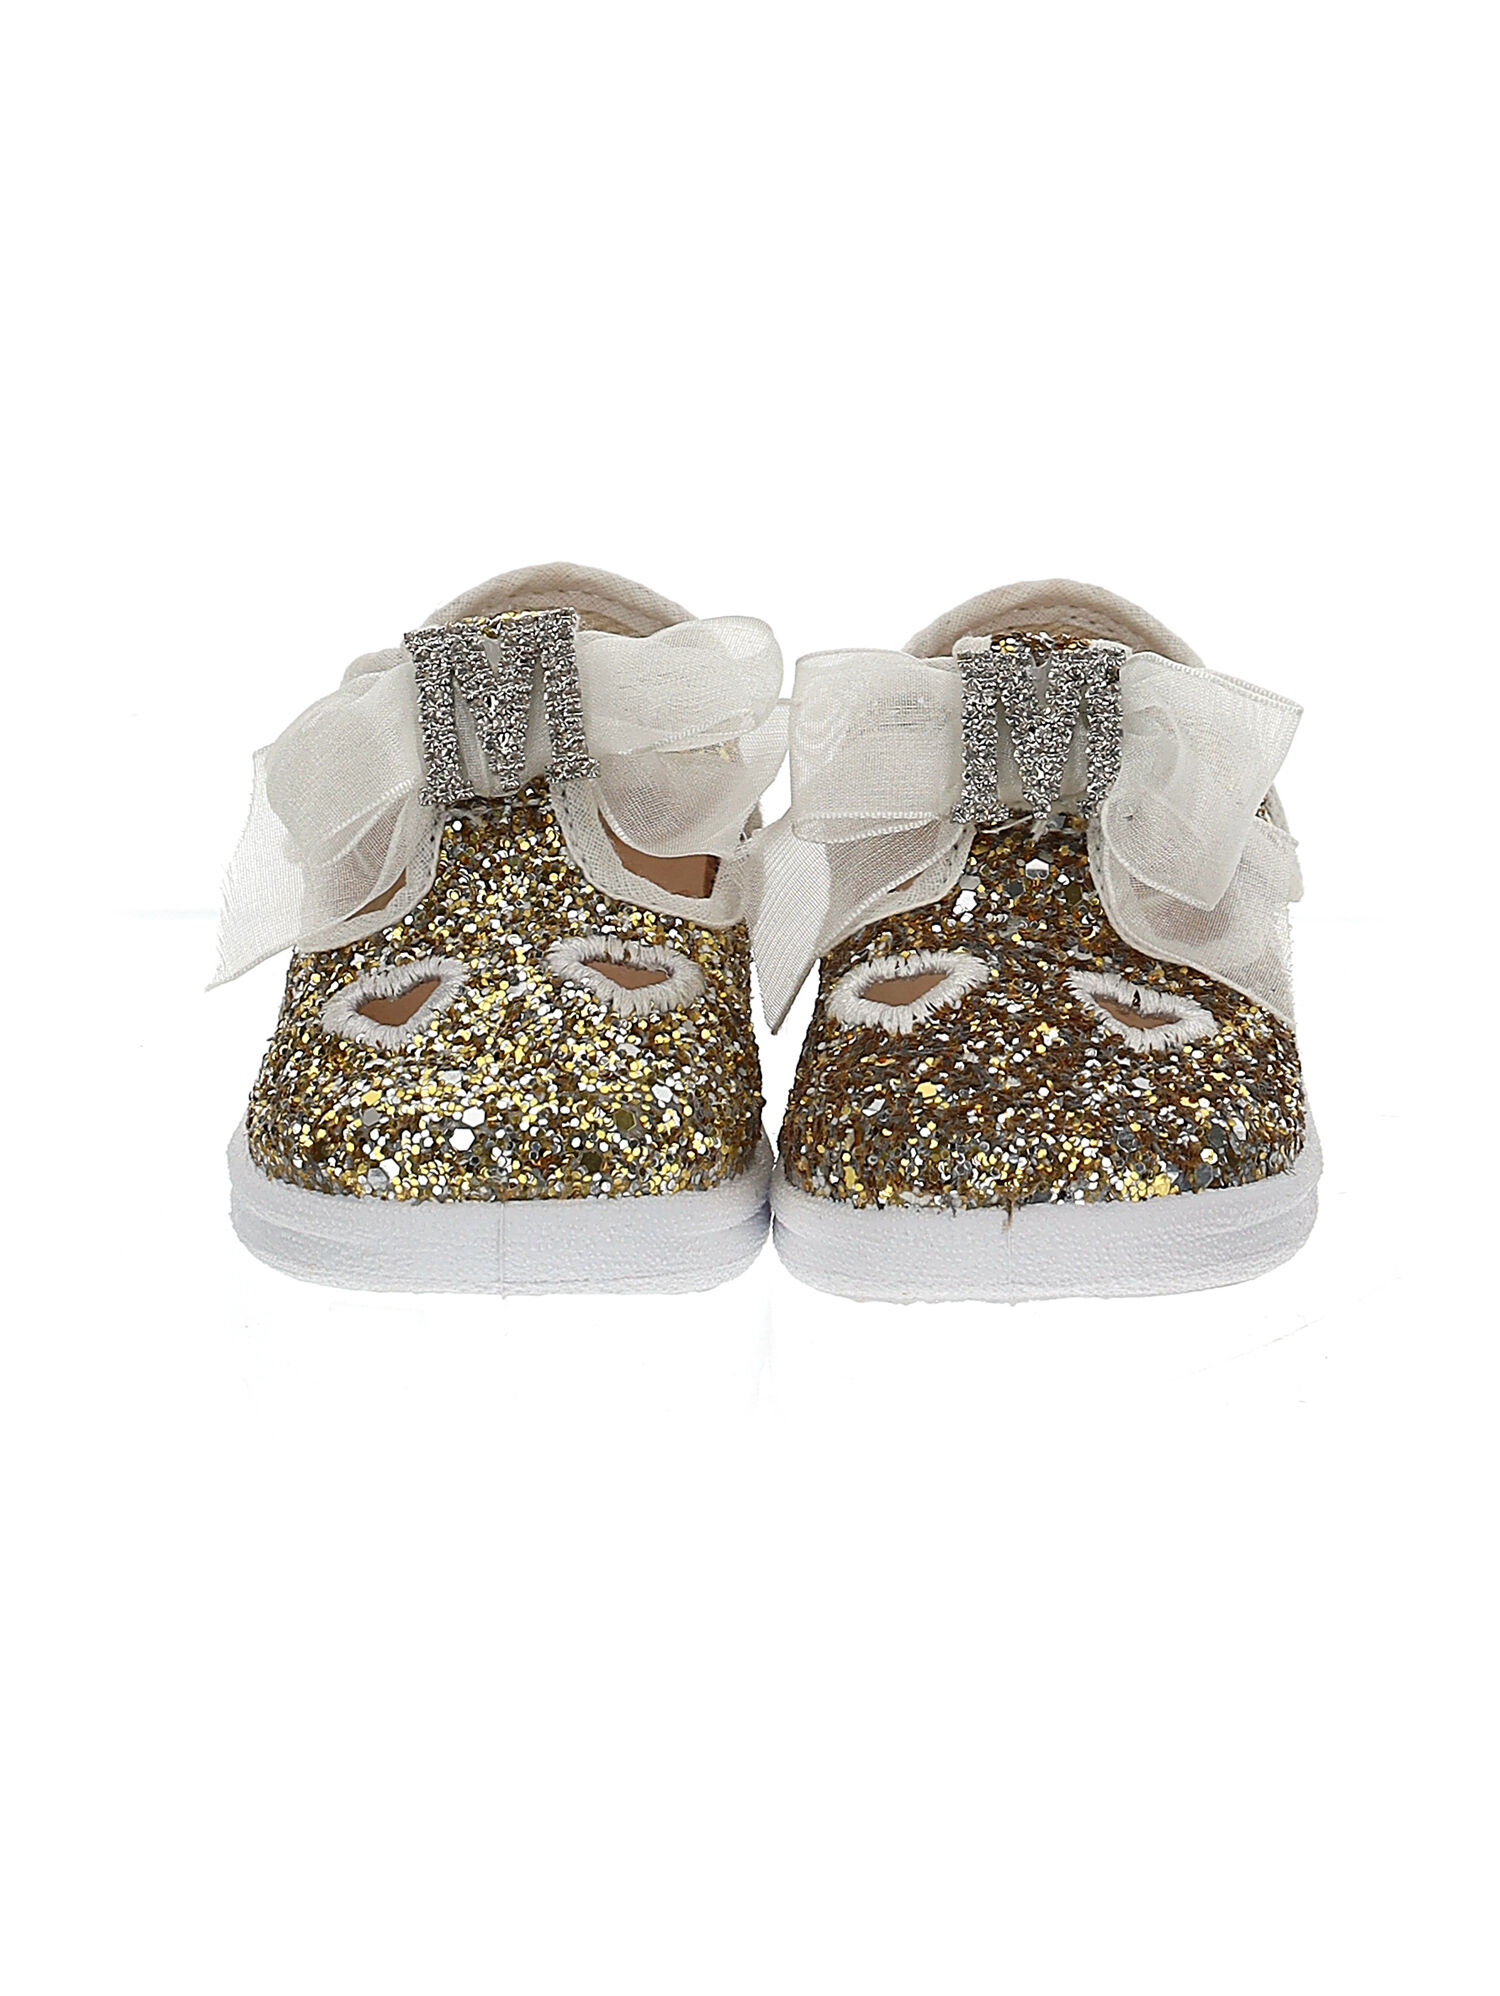 glitter baby shoes